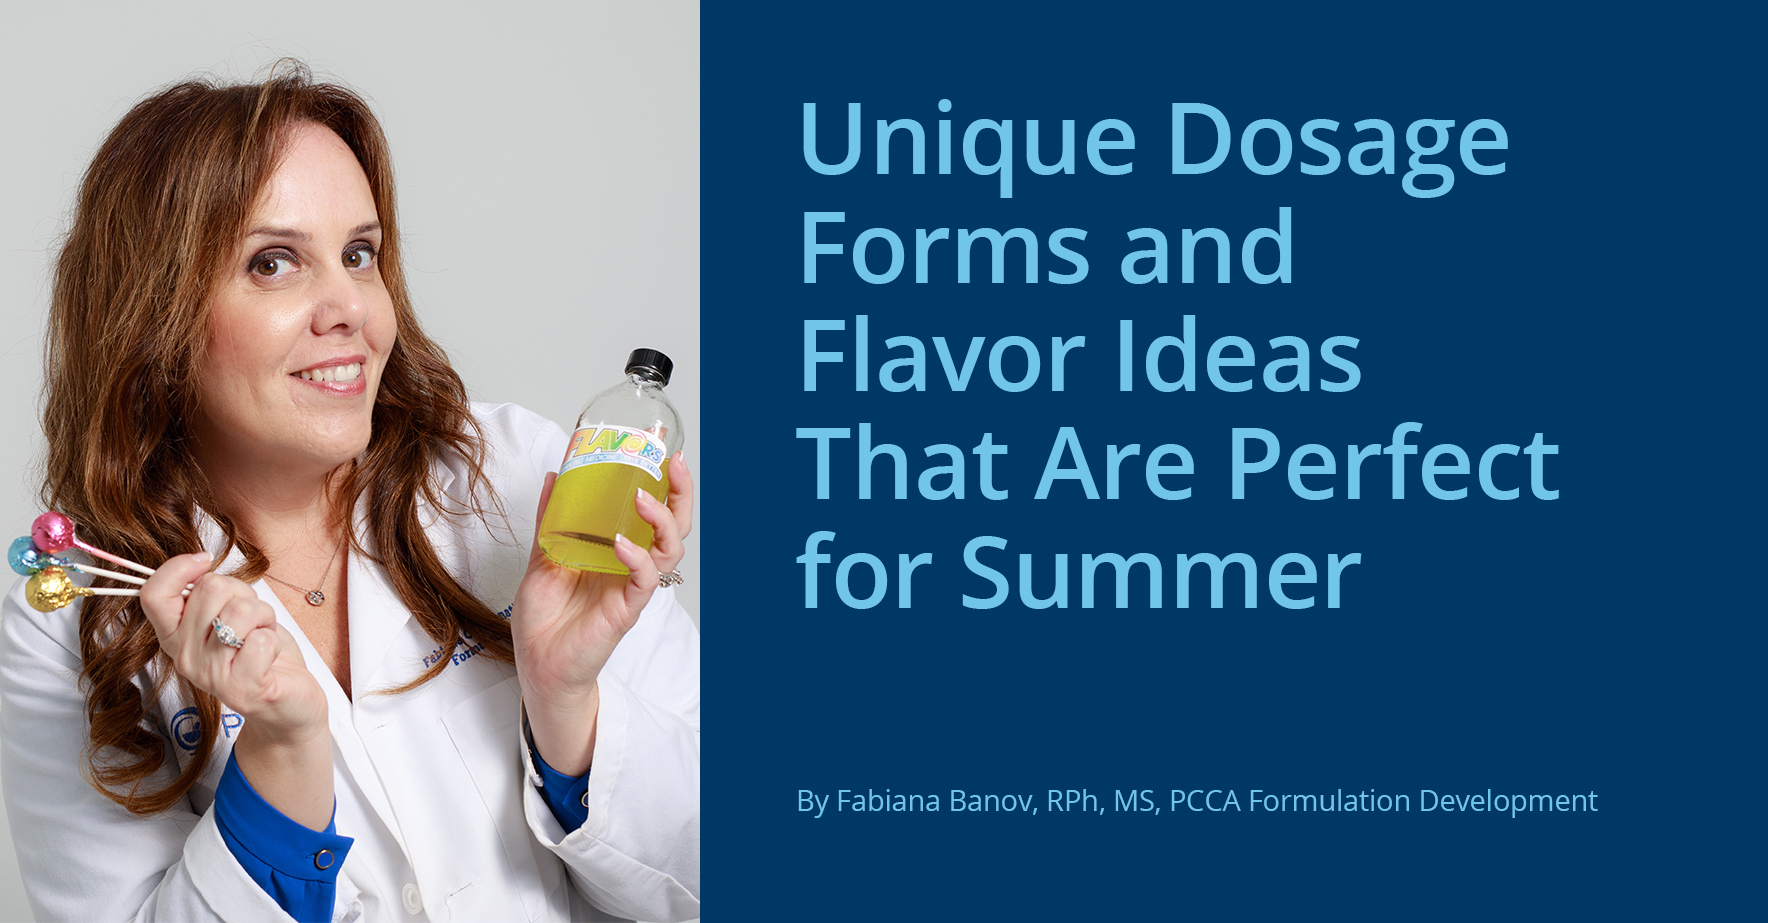 Unique_Dosage_Forms_and_Flavor_Ideas_That_Are_Perfect_for_Summer.jpg